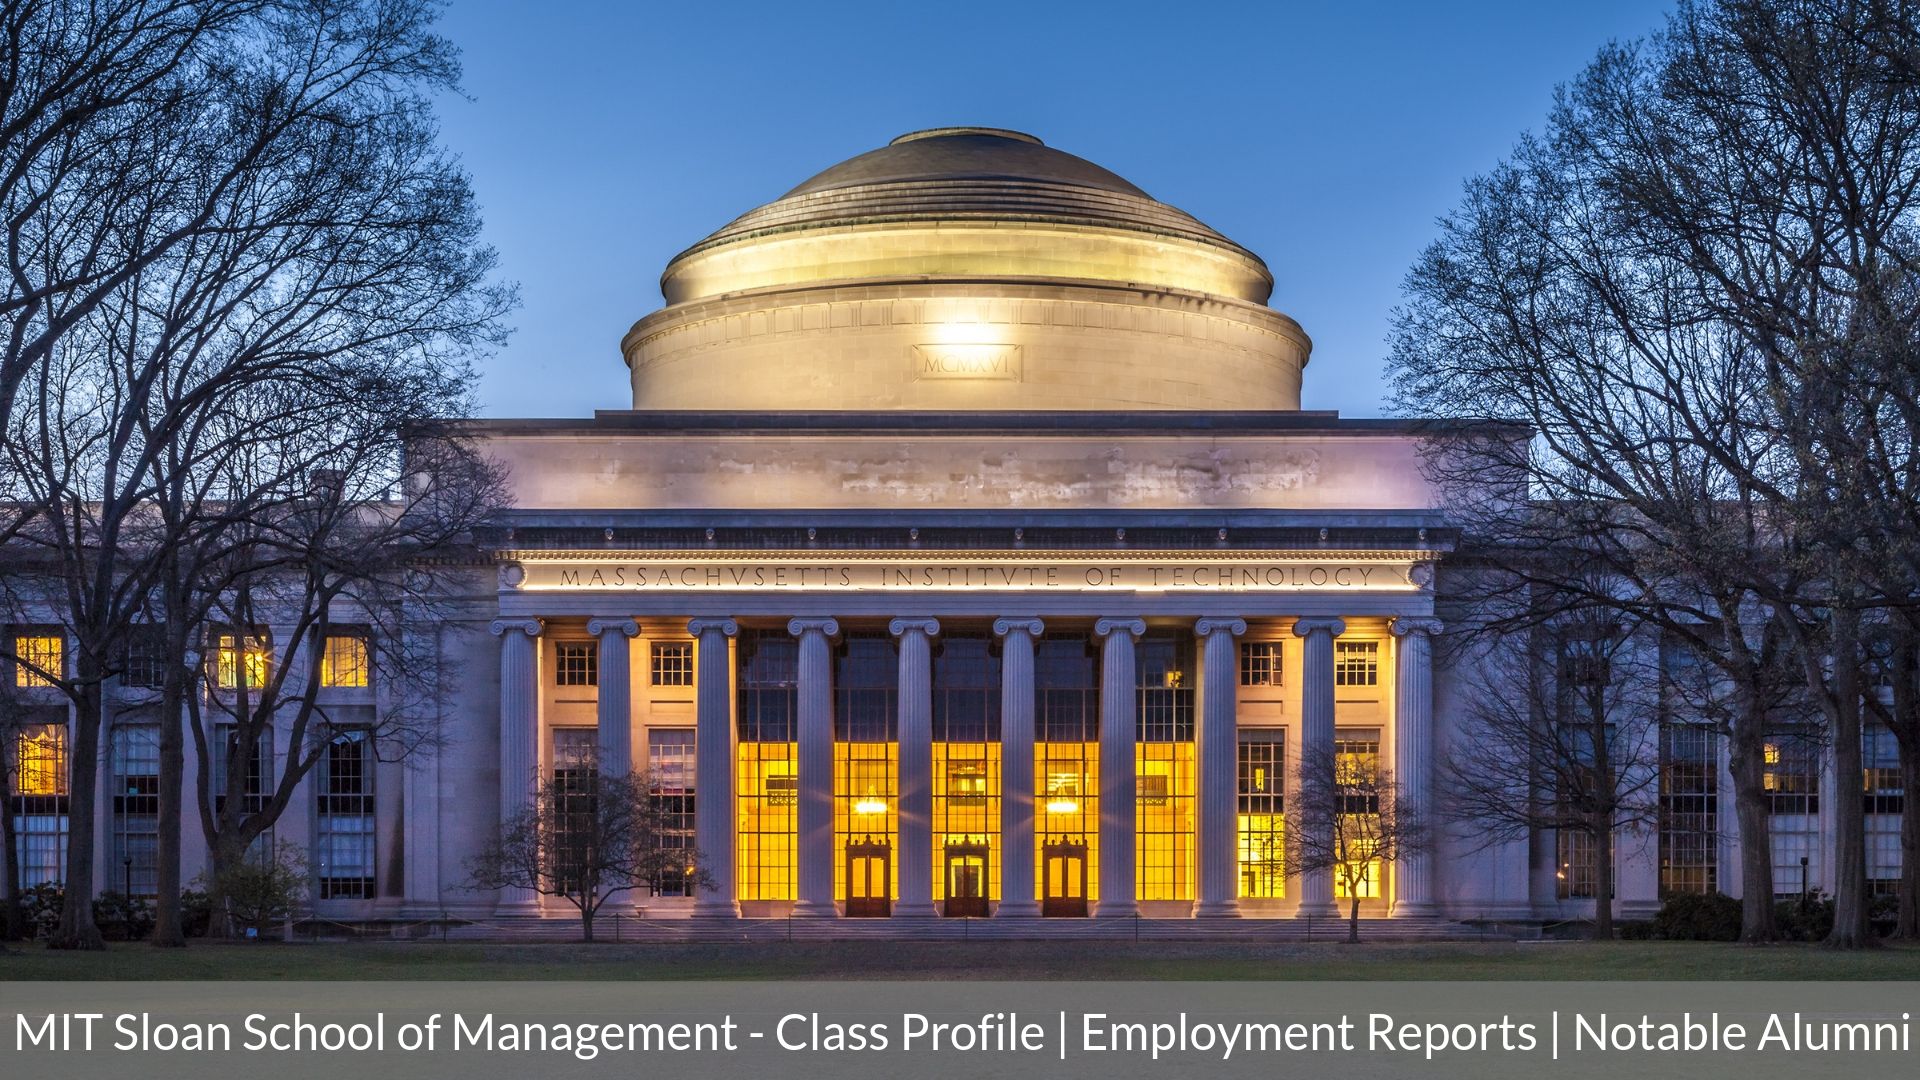 MIT Sloan School of Management - MIT Sloan MBA - Class Profile _ Employment Reports _ Notable Alumni